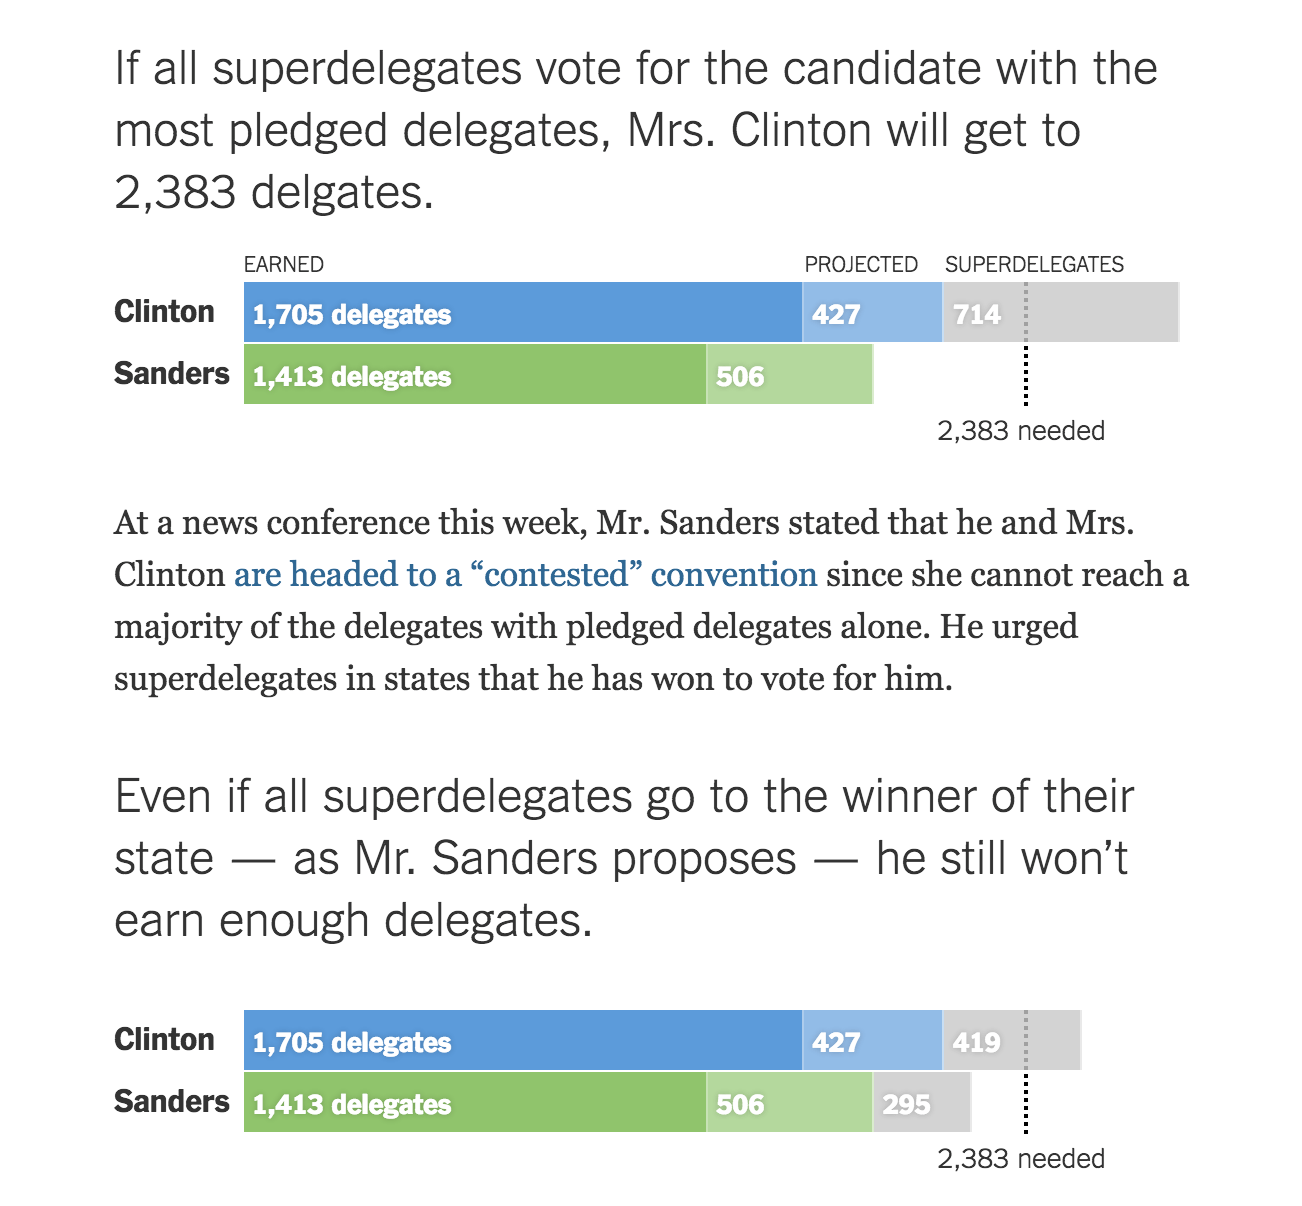 How the Rest of the Democratic Delegate Race Could Unfold